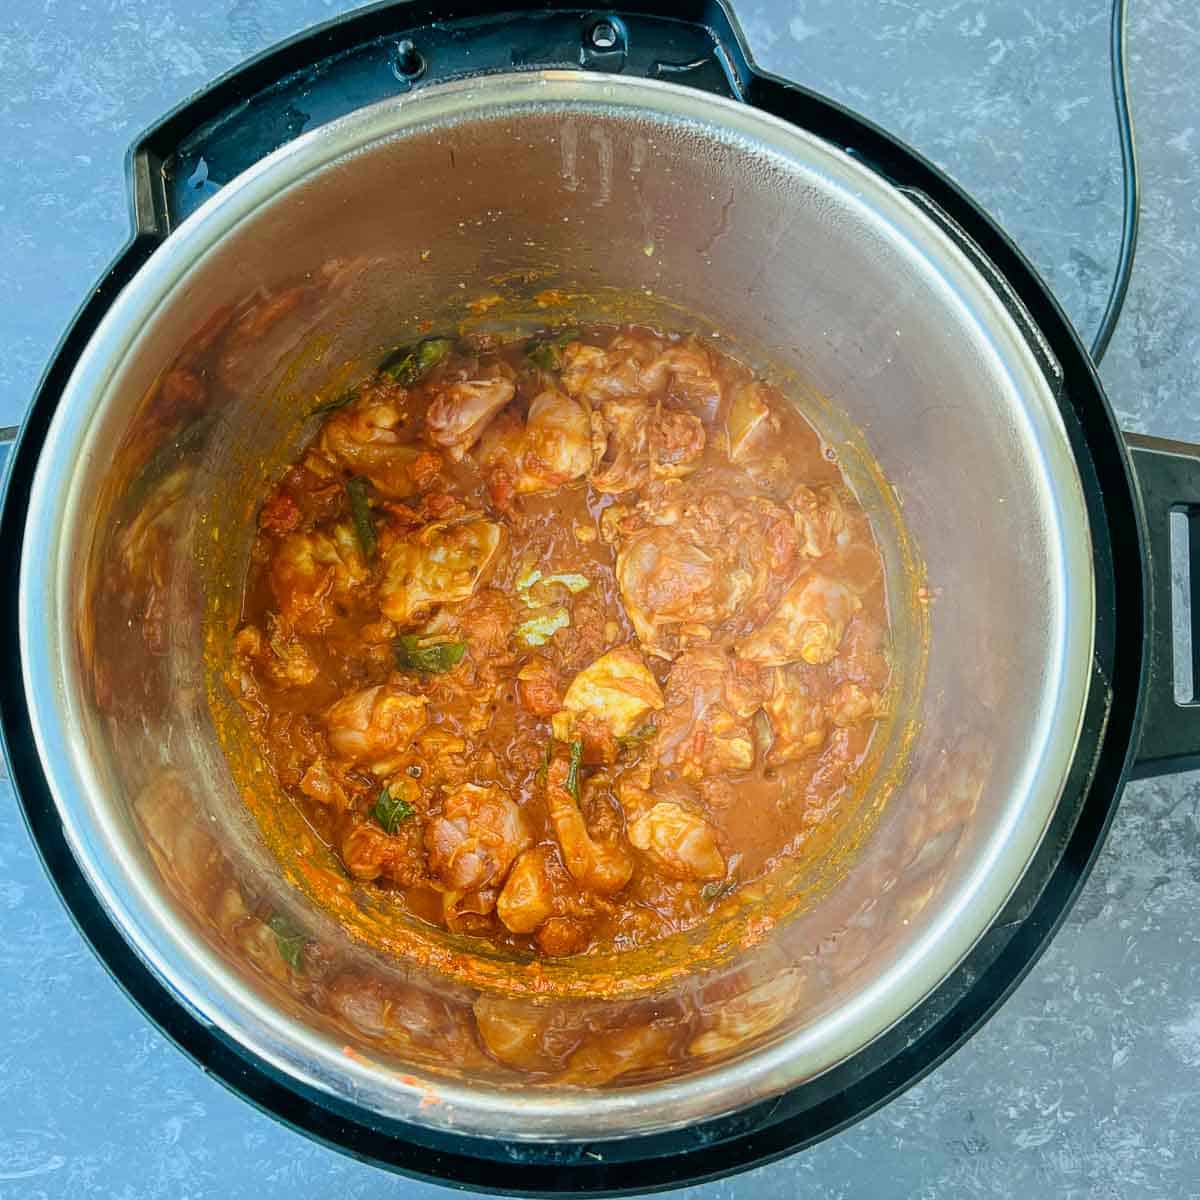 Sauted chicken in tomatoes in the Instant Pot.